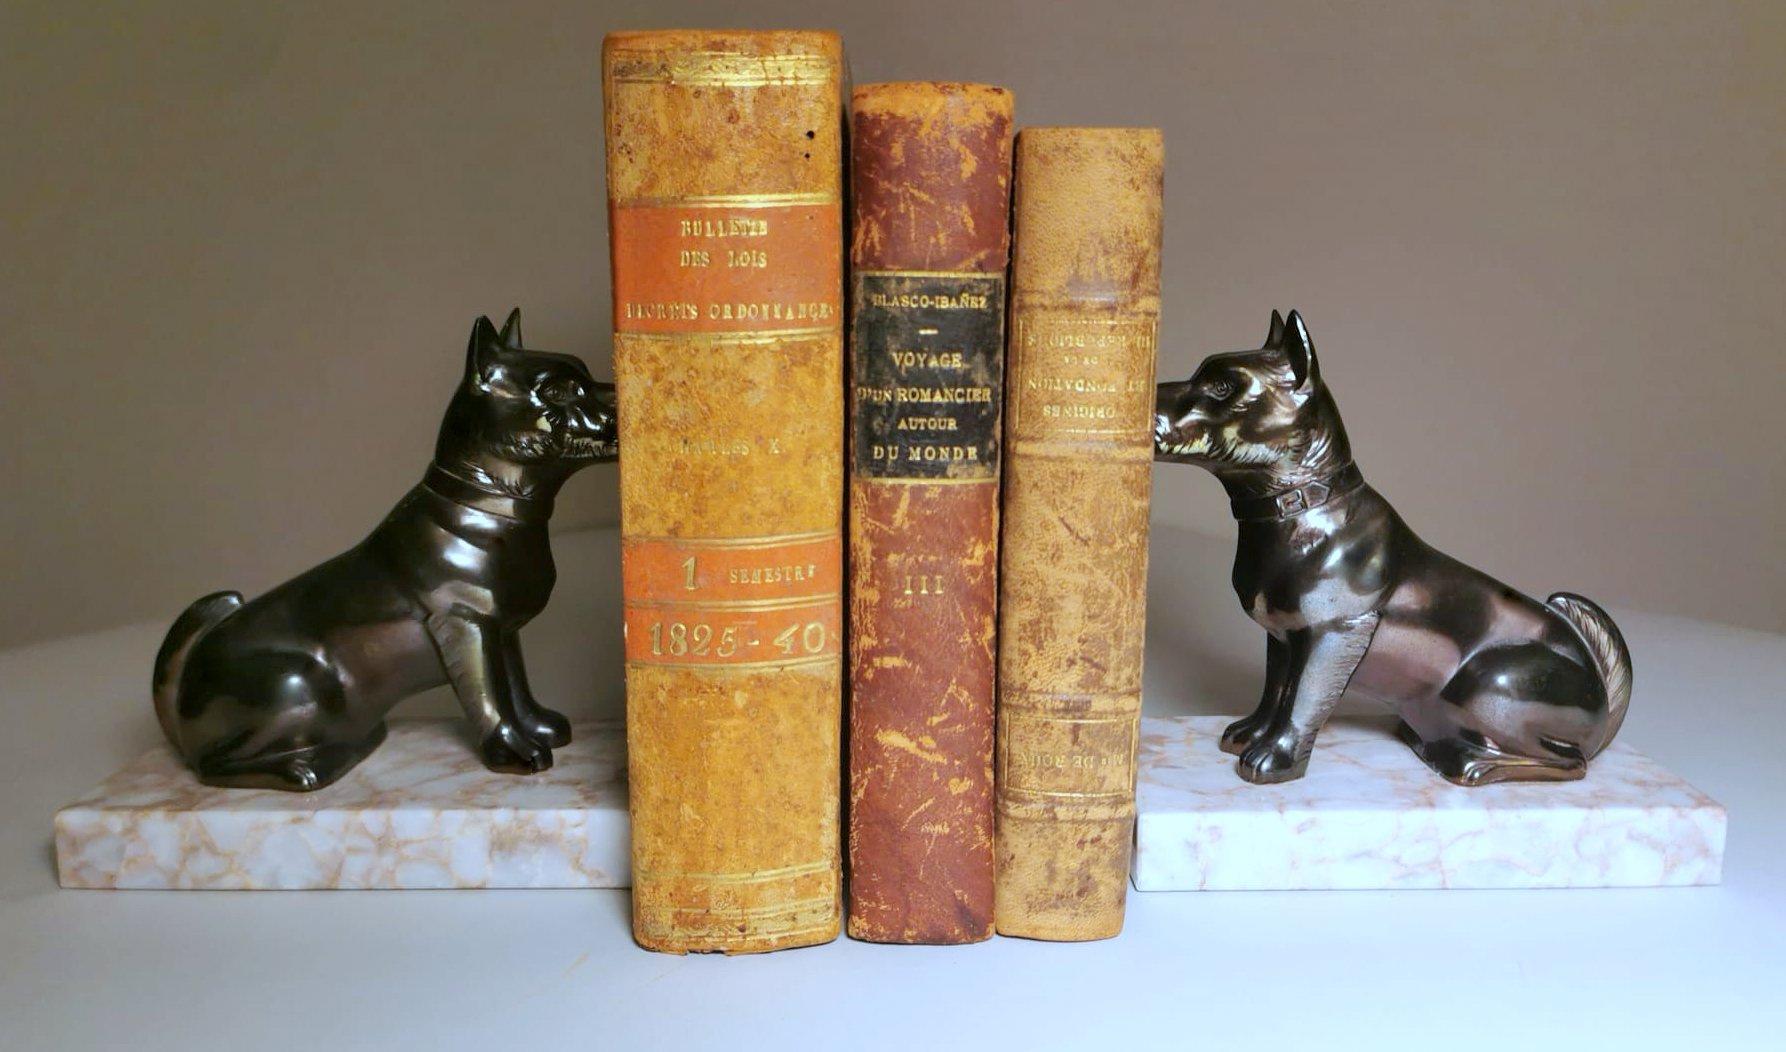 We kindly suggest you read the whole description, because with it we try to give you detailed technical and historical information to guarantee the authenticity of our objects.
Peculiar and original pair of Art Deco-style bookend dogs; they were